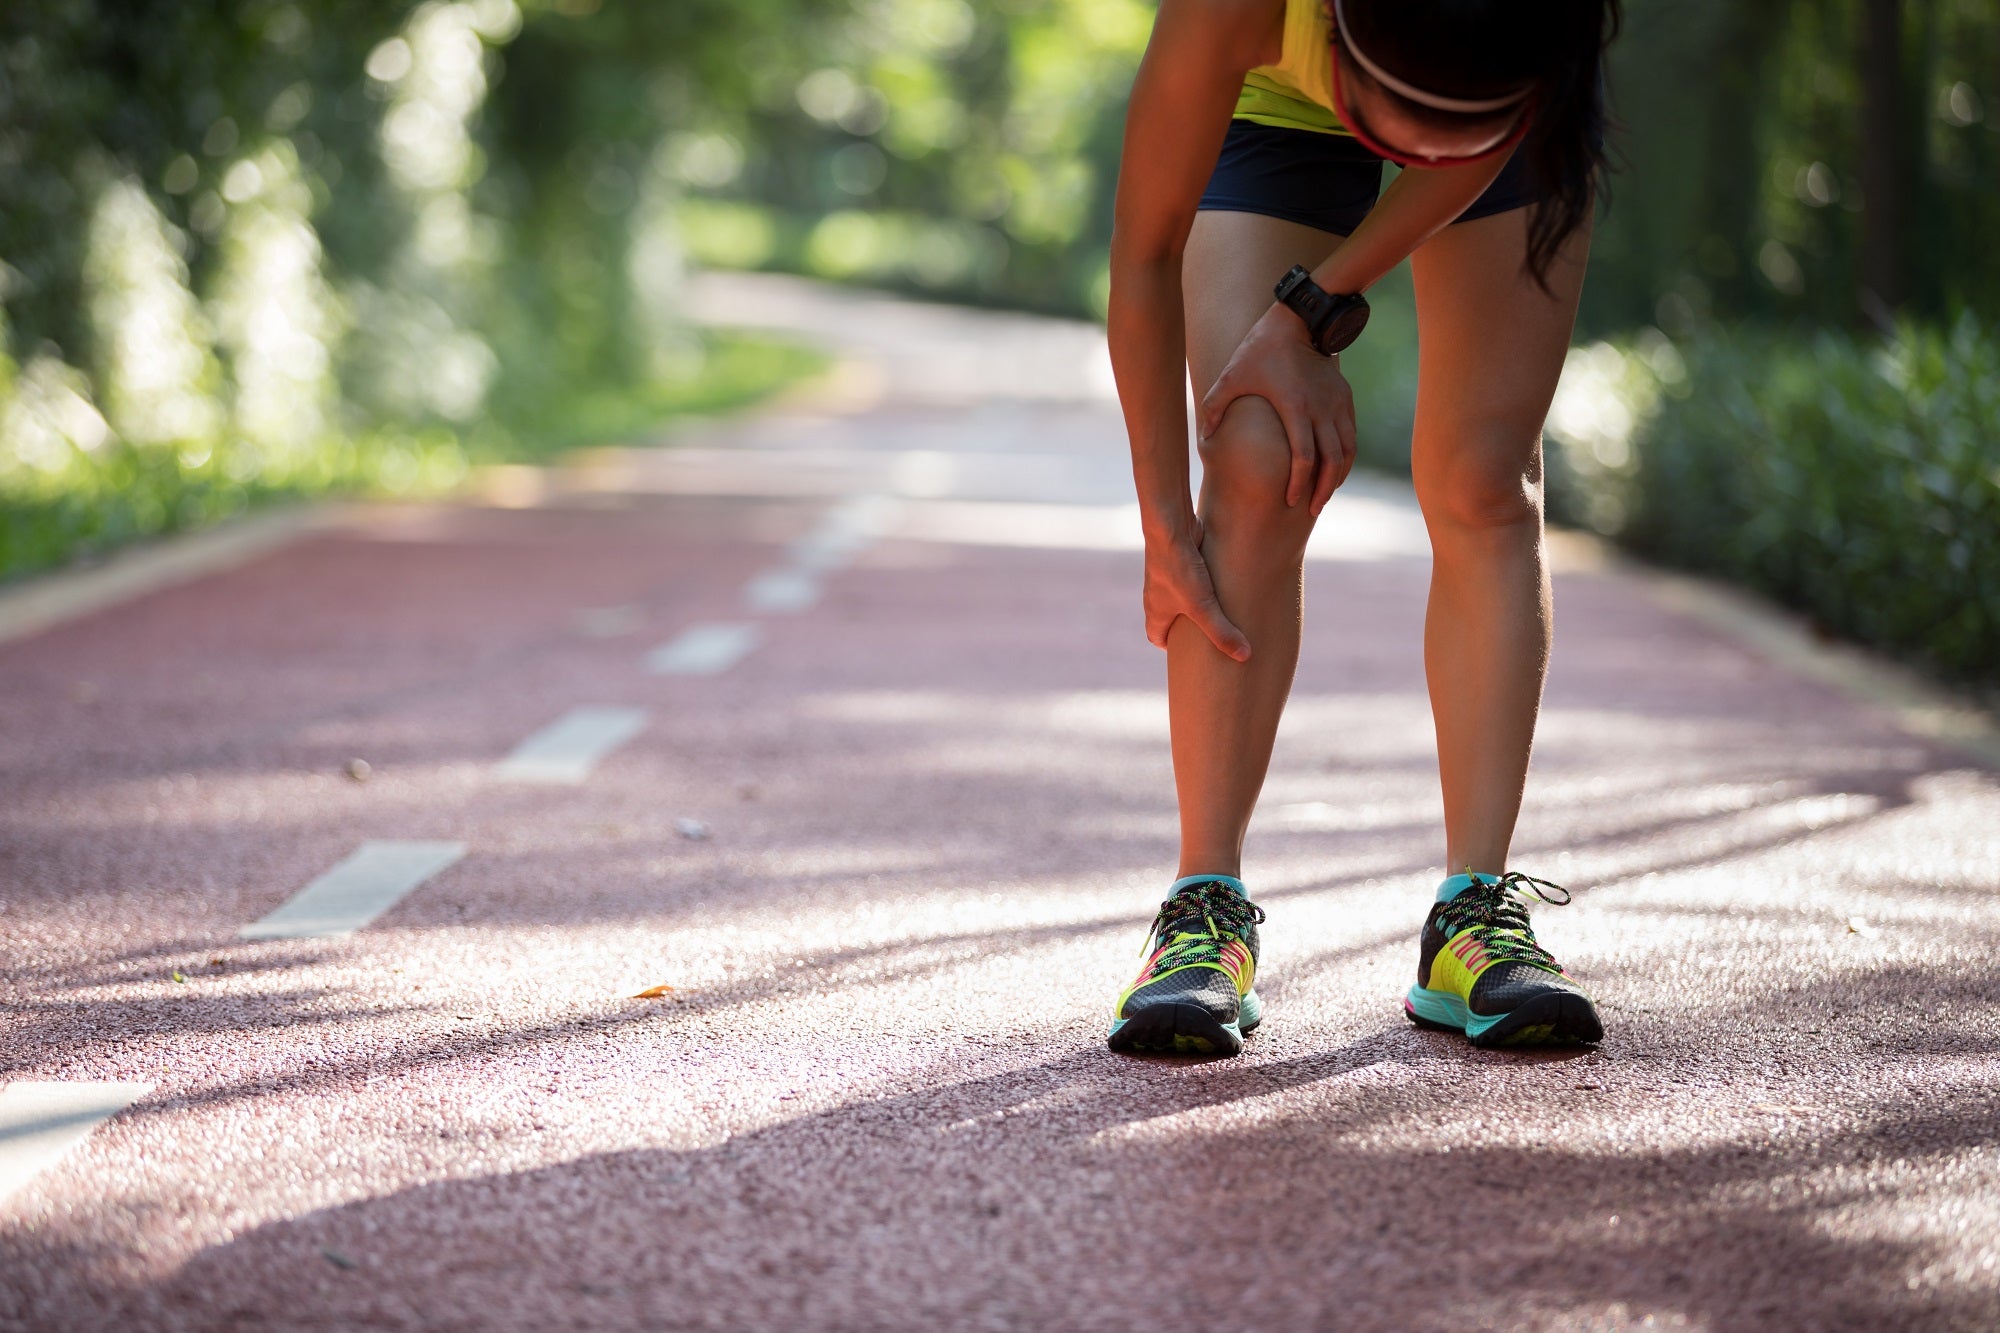 Afraid of injuries during running? New research has found a way to prevent them.